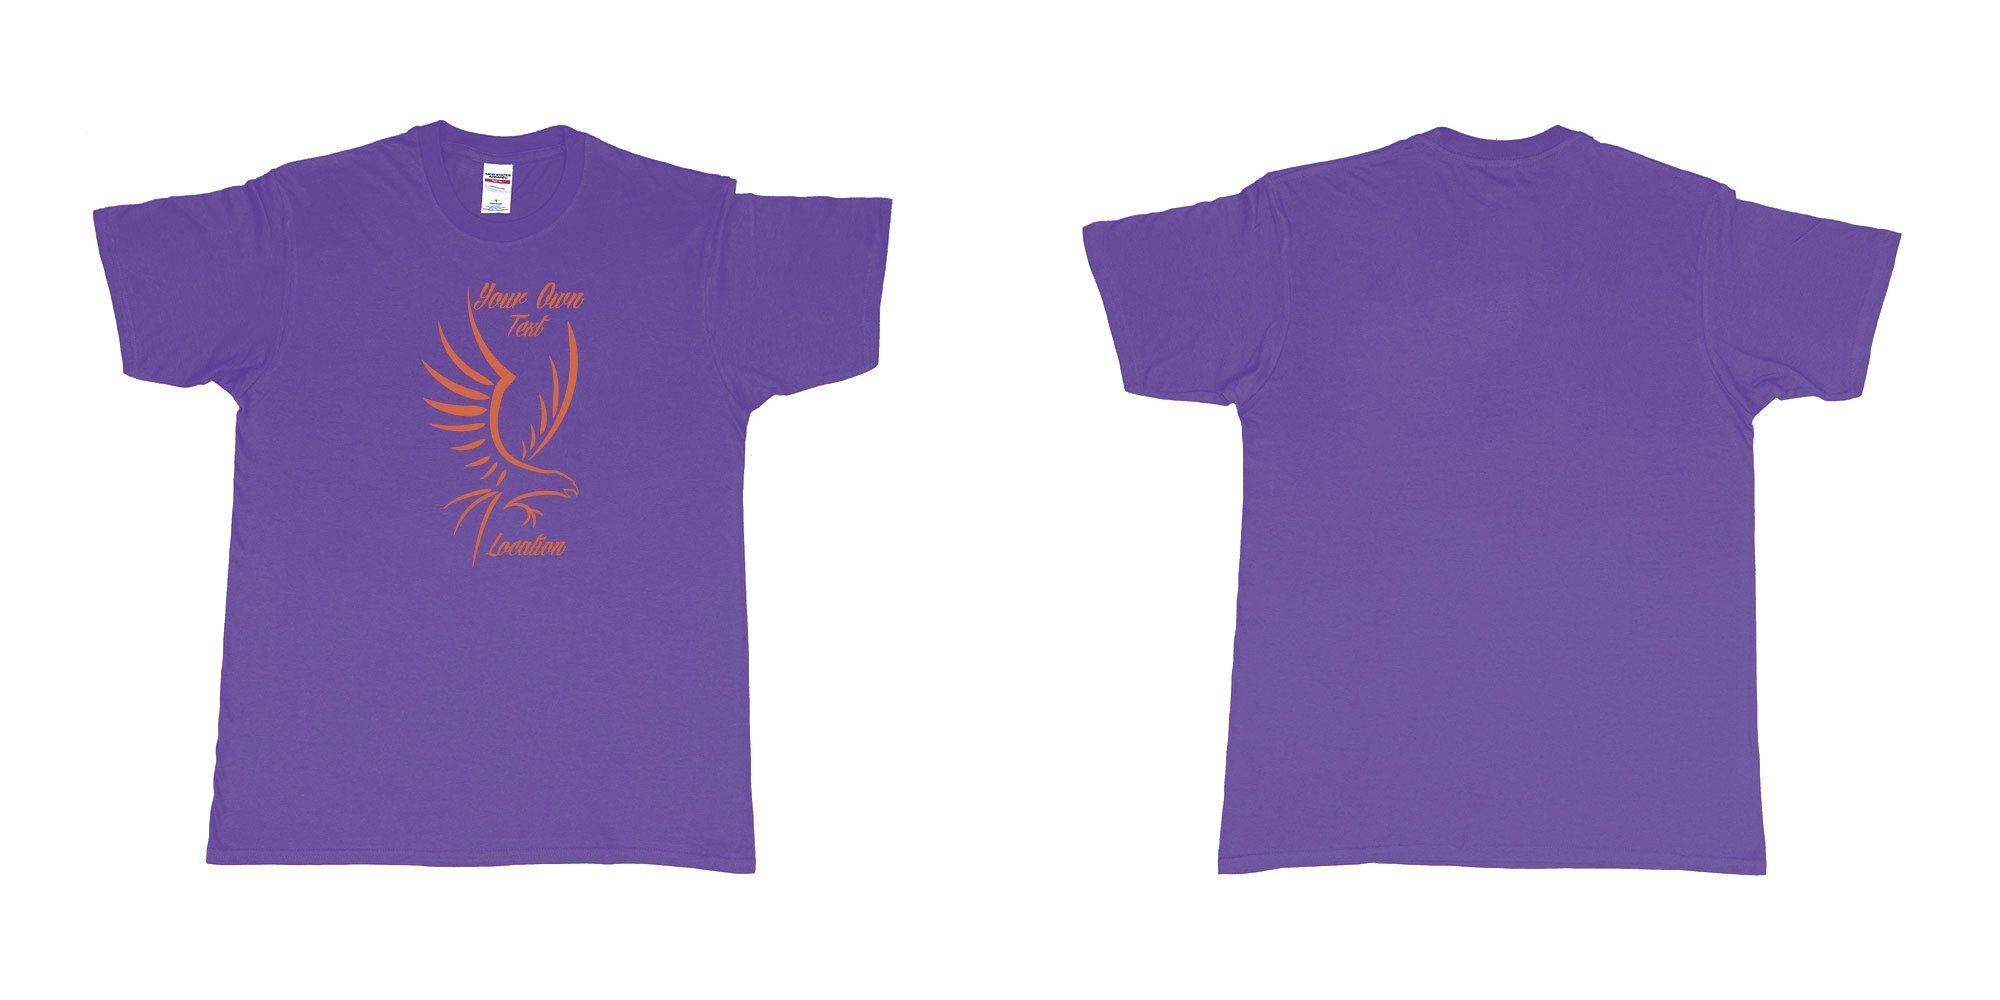 Custom tshirt design custom eagle drawing custom text in fabric color purple choice your own text made in Bali by The Pirate Way